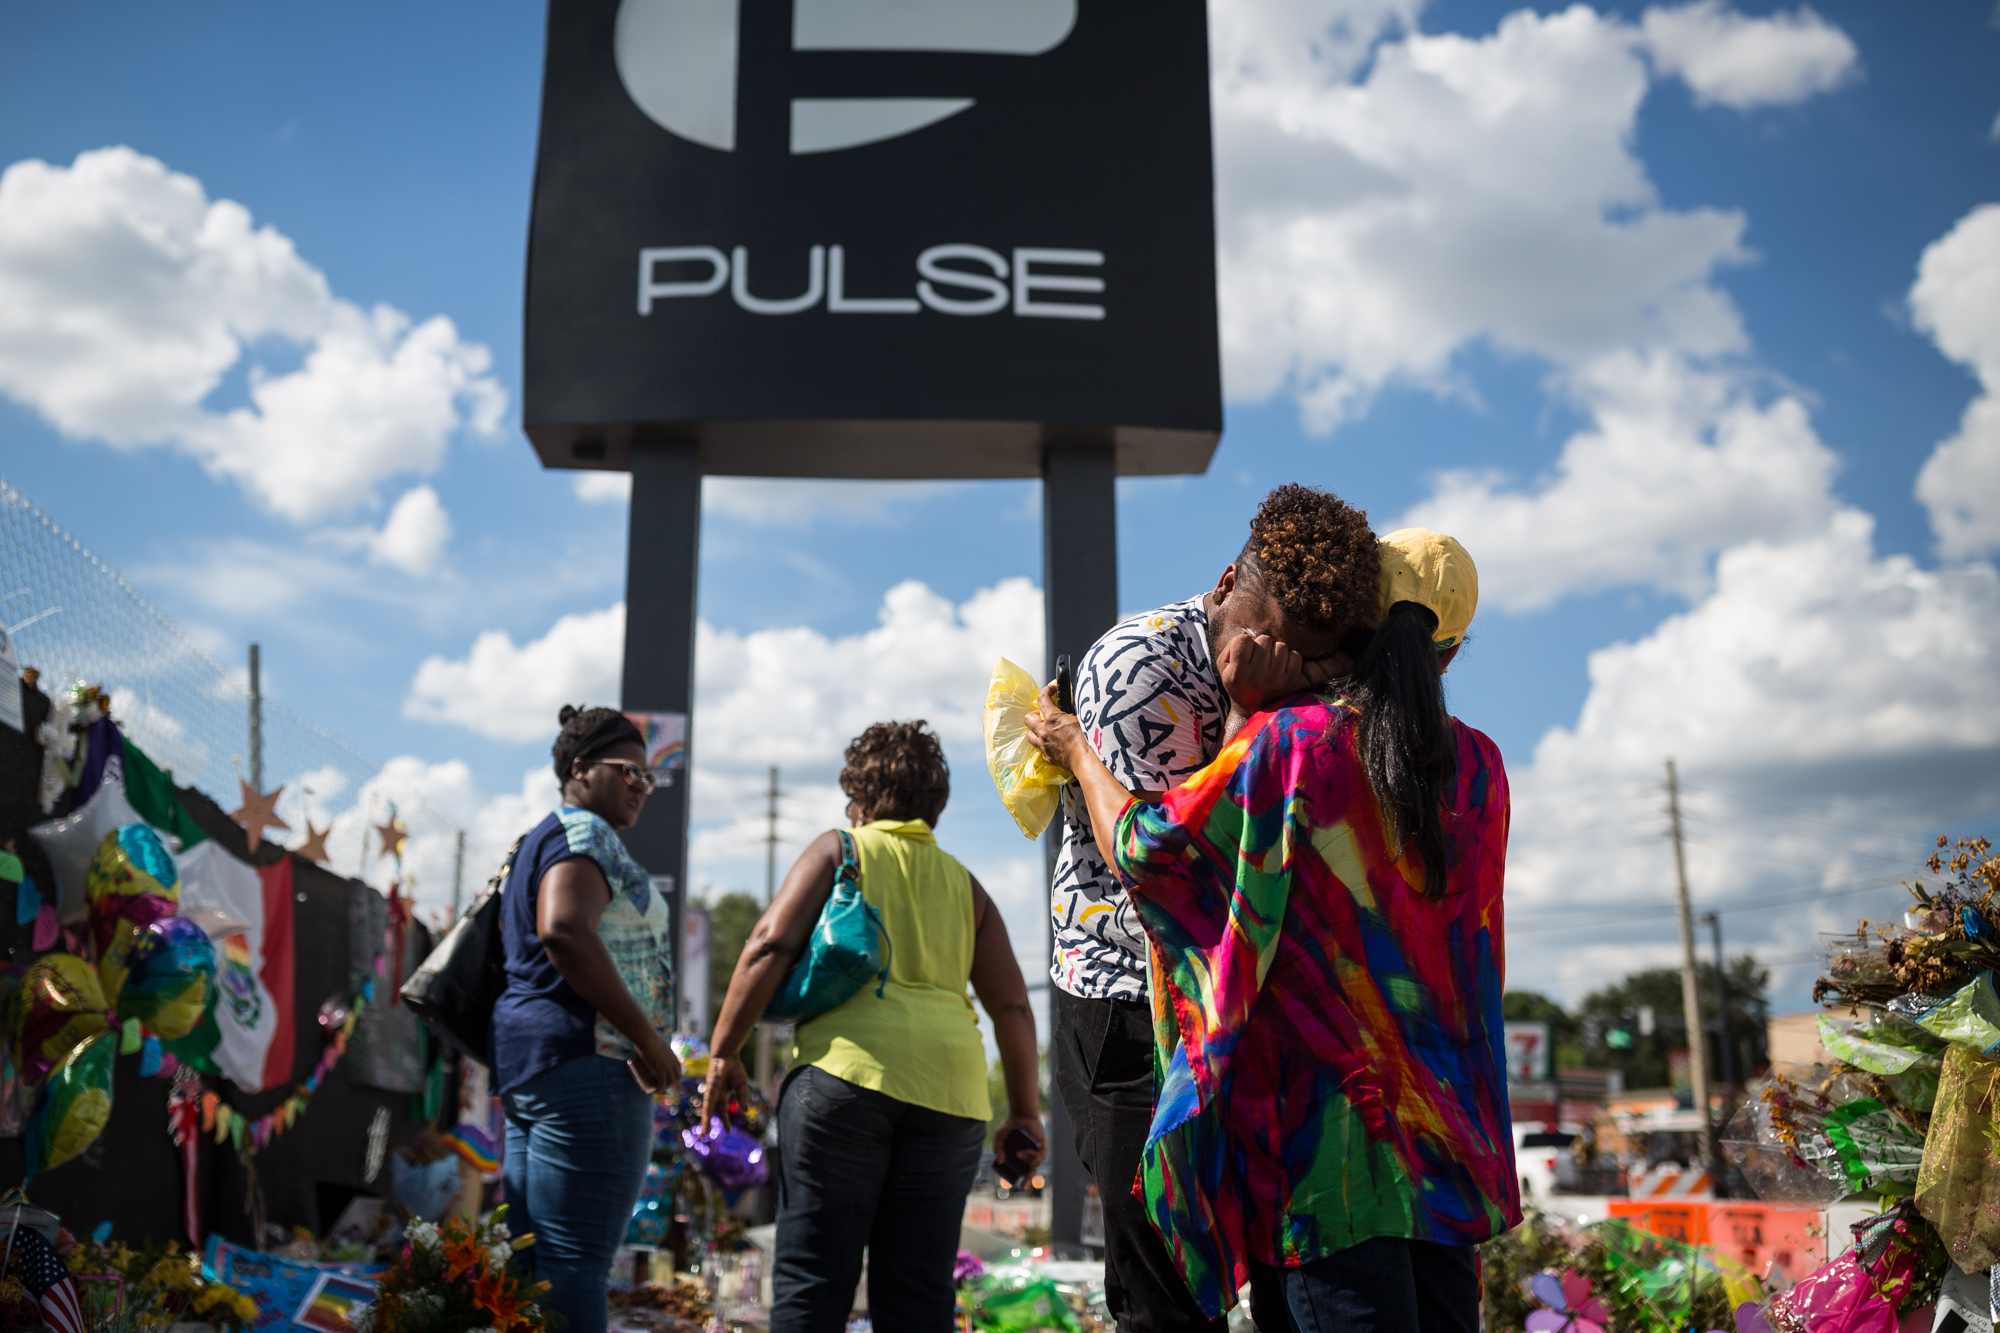 PHOTO: Wayne Dominici, 23, cries on the shoulder of his aunt, Ada Dominici, July 12, 2016, at a memorial outside Pulse, the gay nightclub where a shooter killed 49 people in Orlando, Florida.